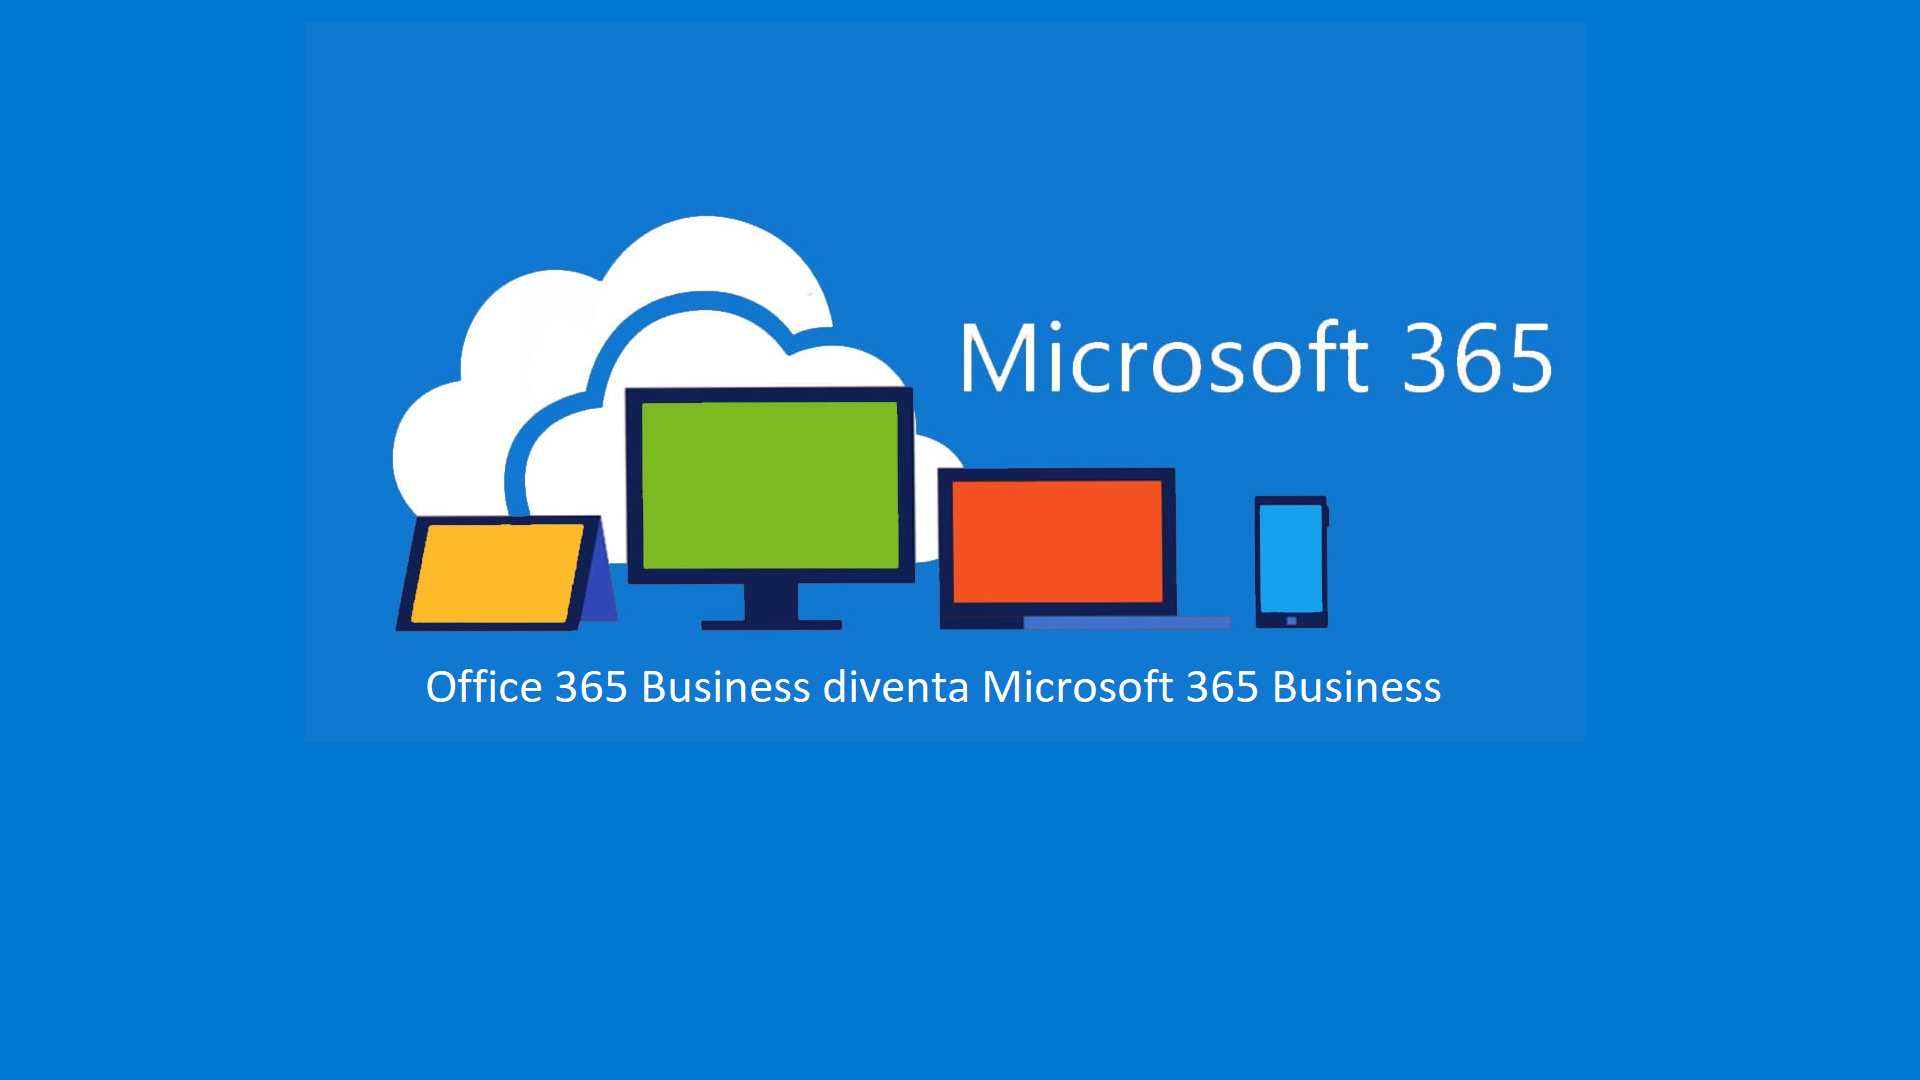 Office 365 Business diventa Microsoft 365 Business - ICT Power